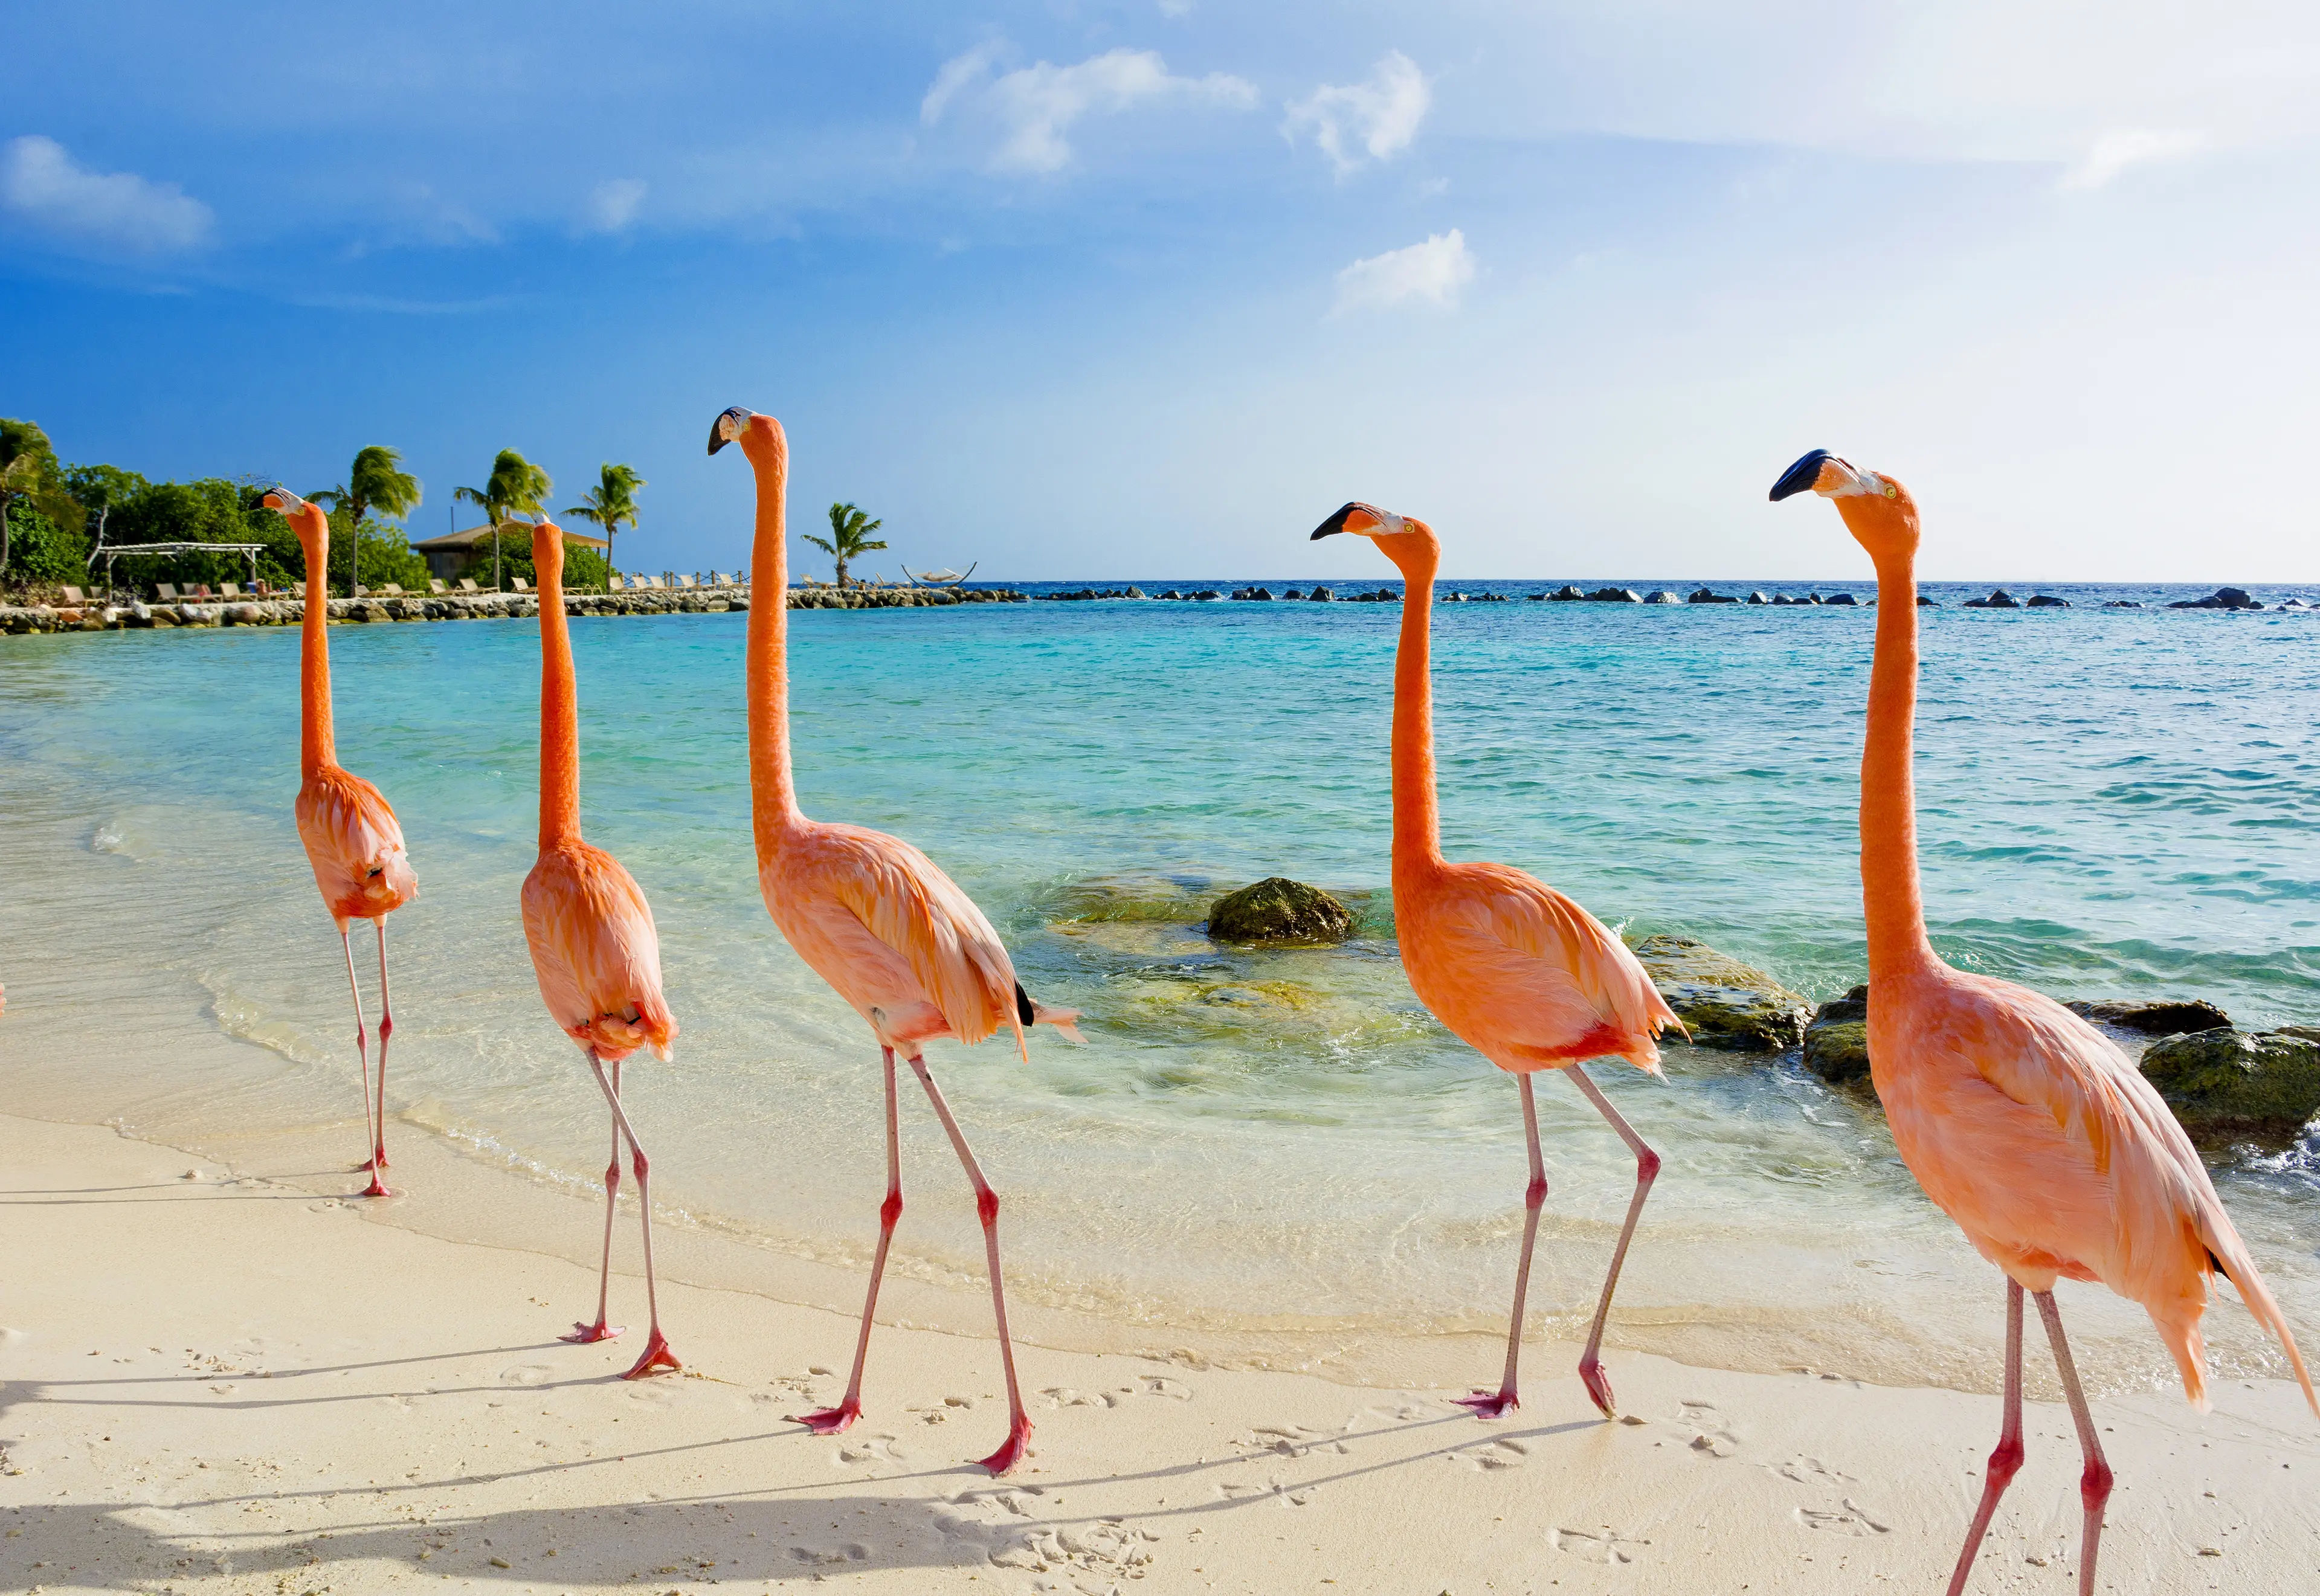 3-Day Aruba: Local Food, Wine, and Sightseeing for Couples